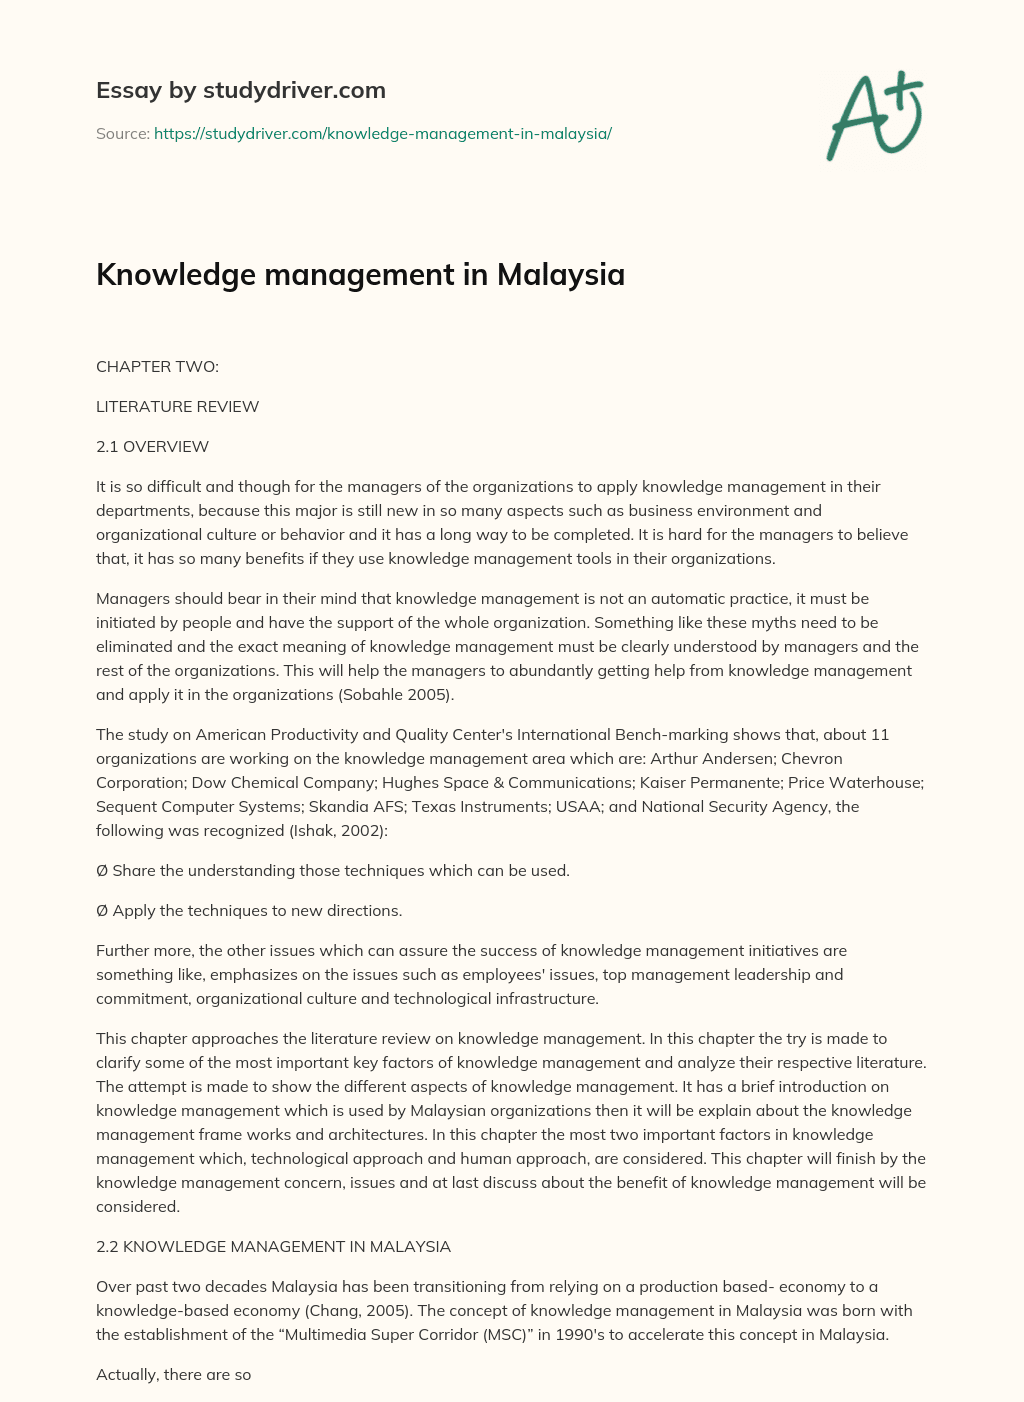 Knowledge Management in Malaysia essay